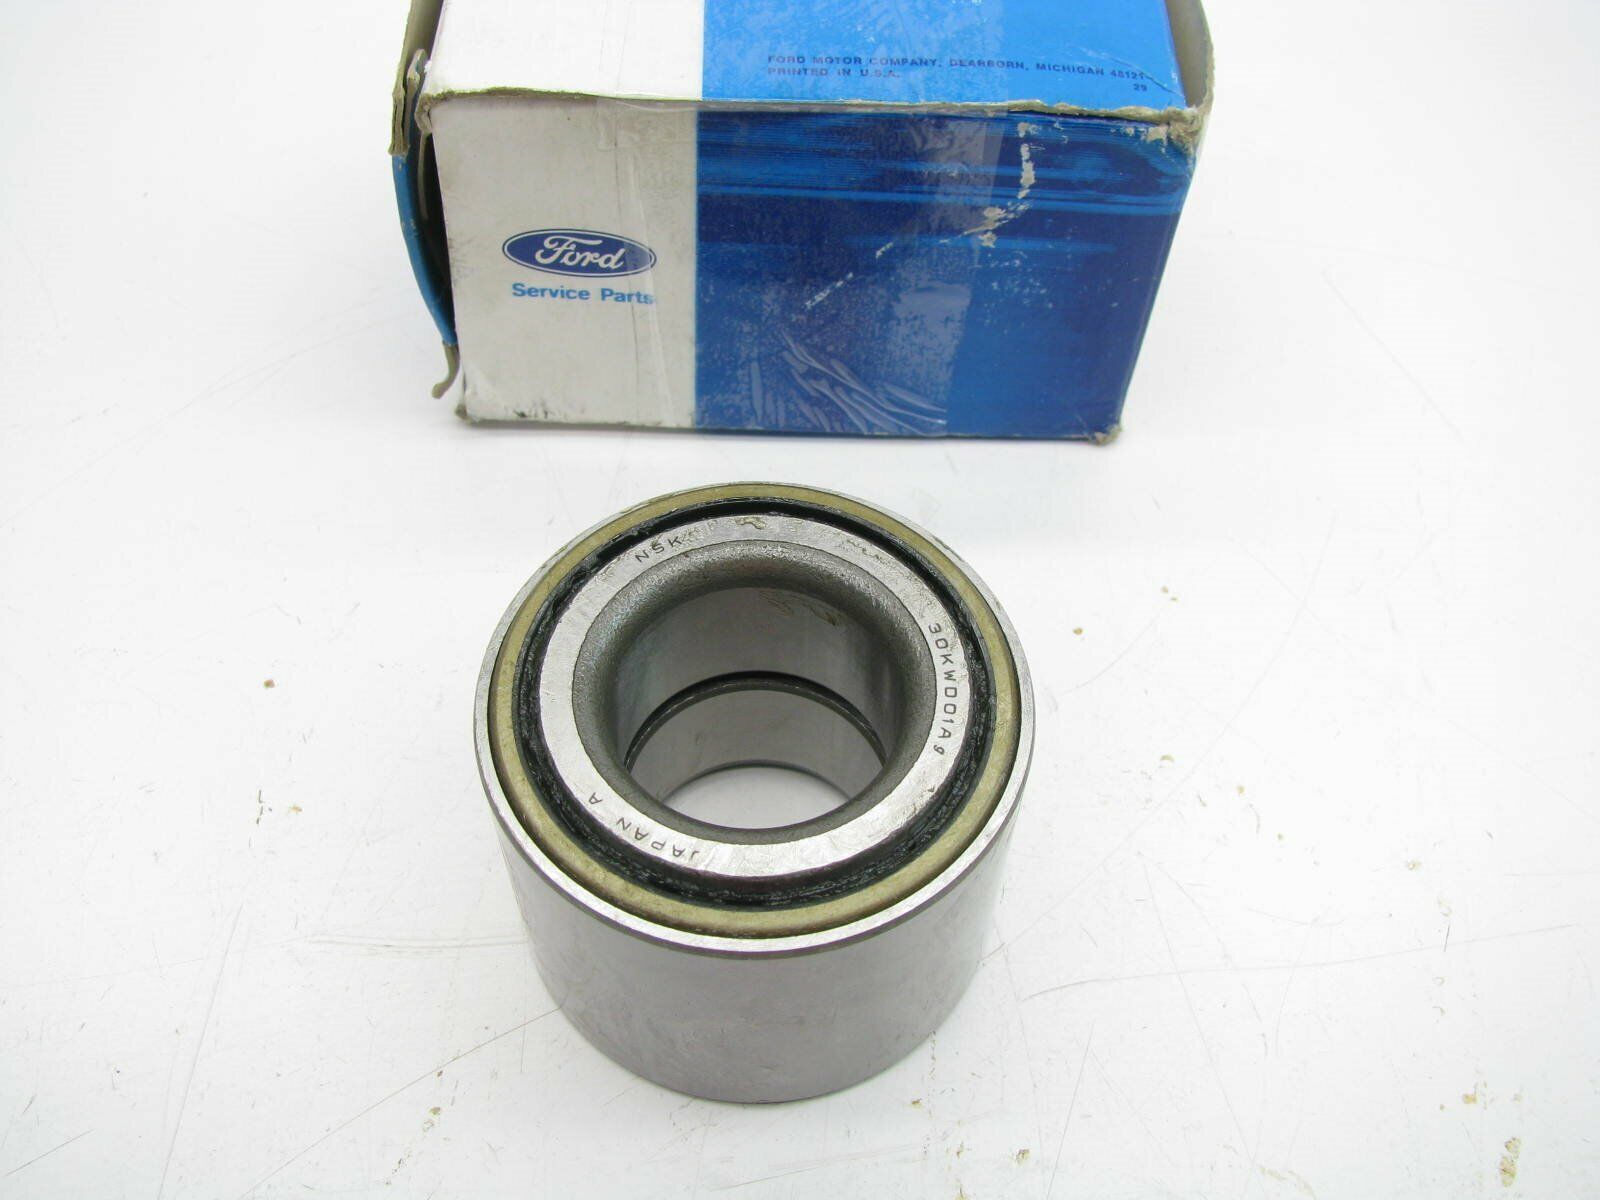 NEW - OEM Ford E92Z-1225-A Rear Wheel Bearing 1989-1997 Ford Probe